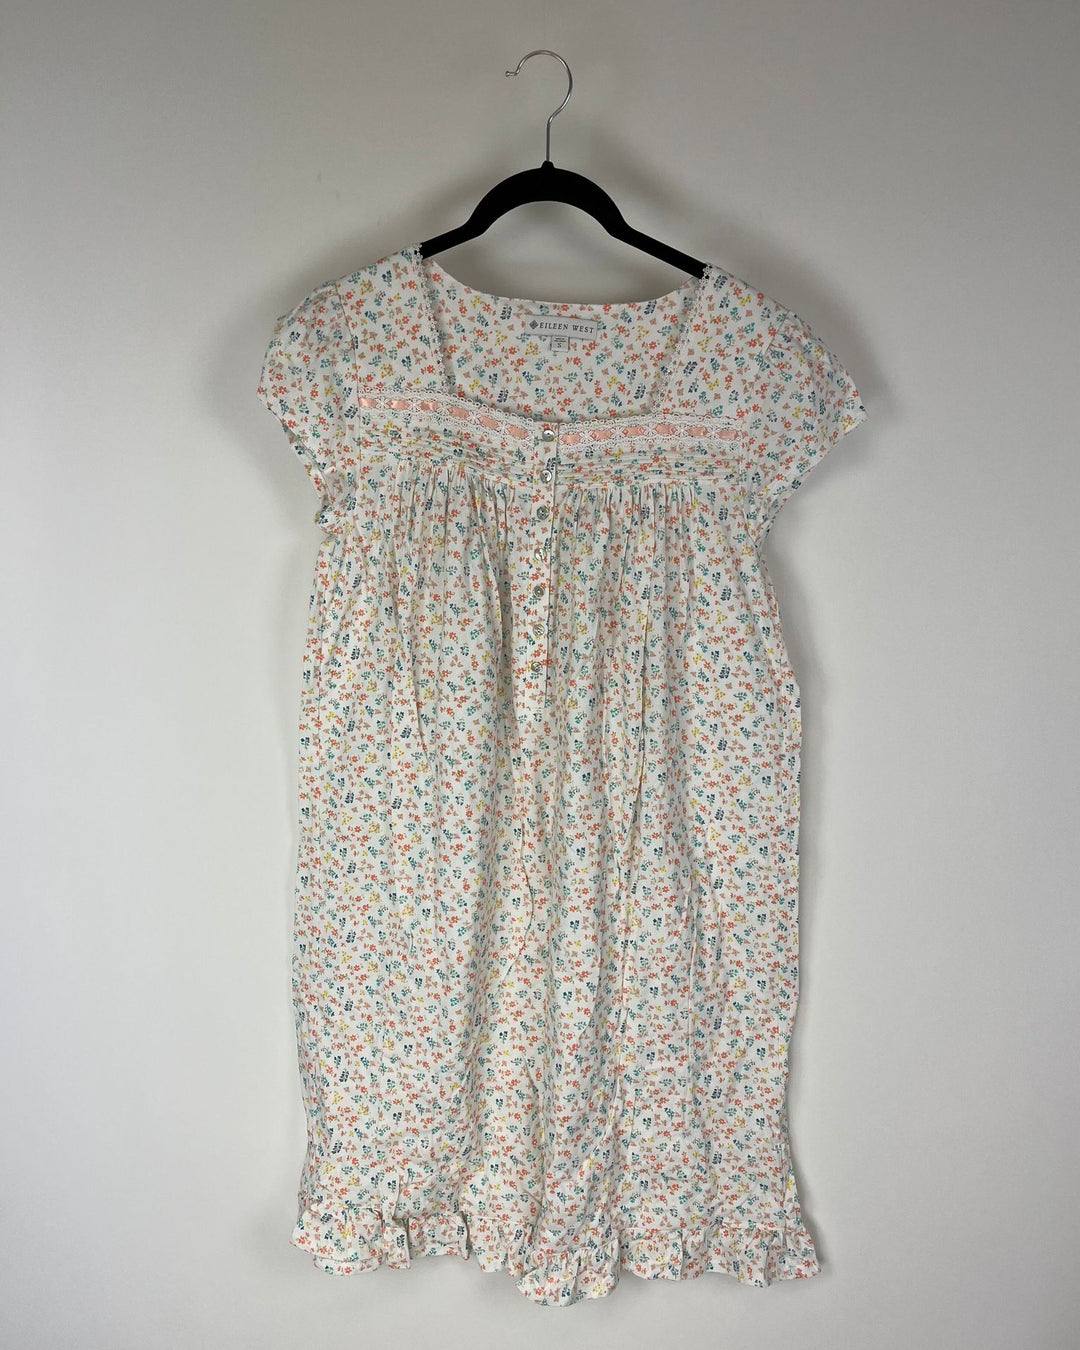 Colorful Floral Nightgown - Small/Medium